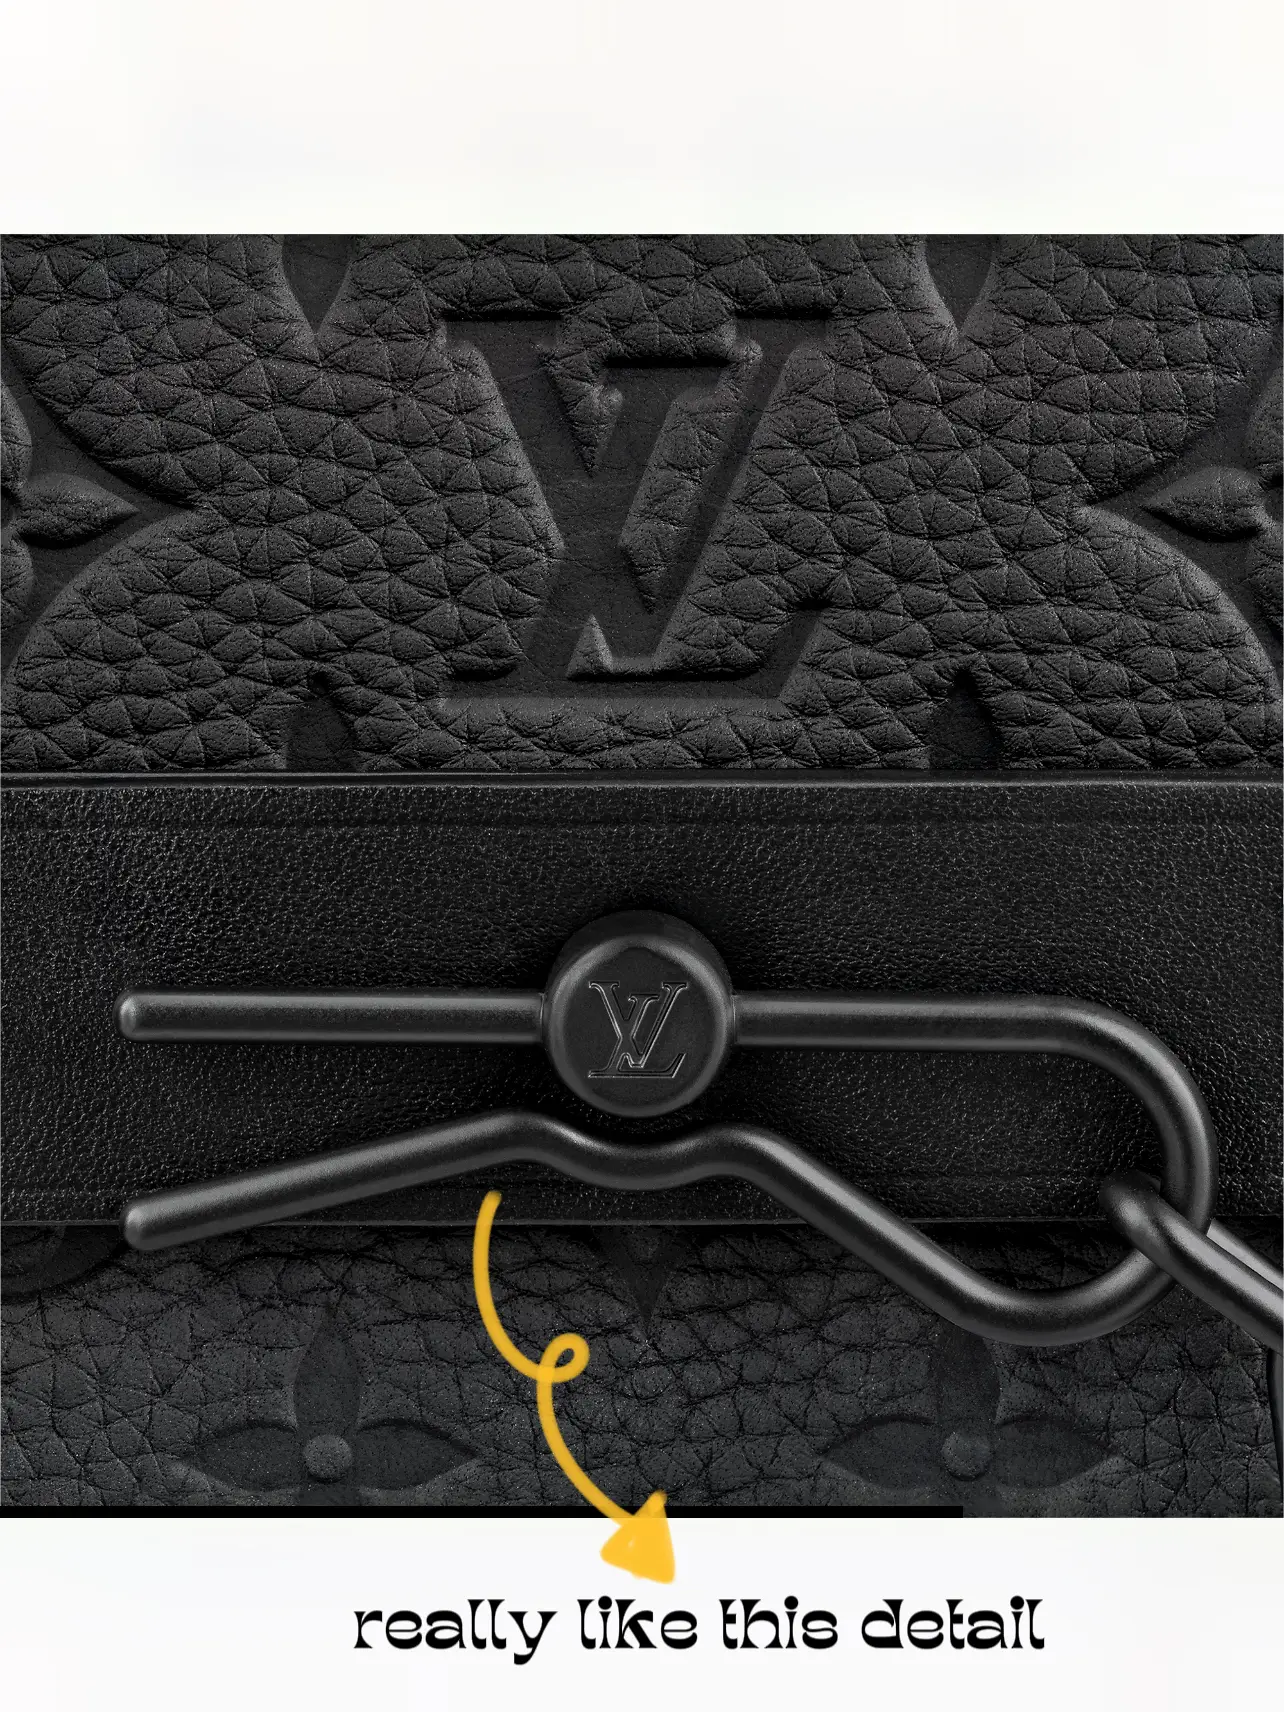 Is Lv Cheaper In Europe Or Use